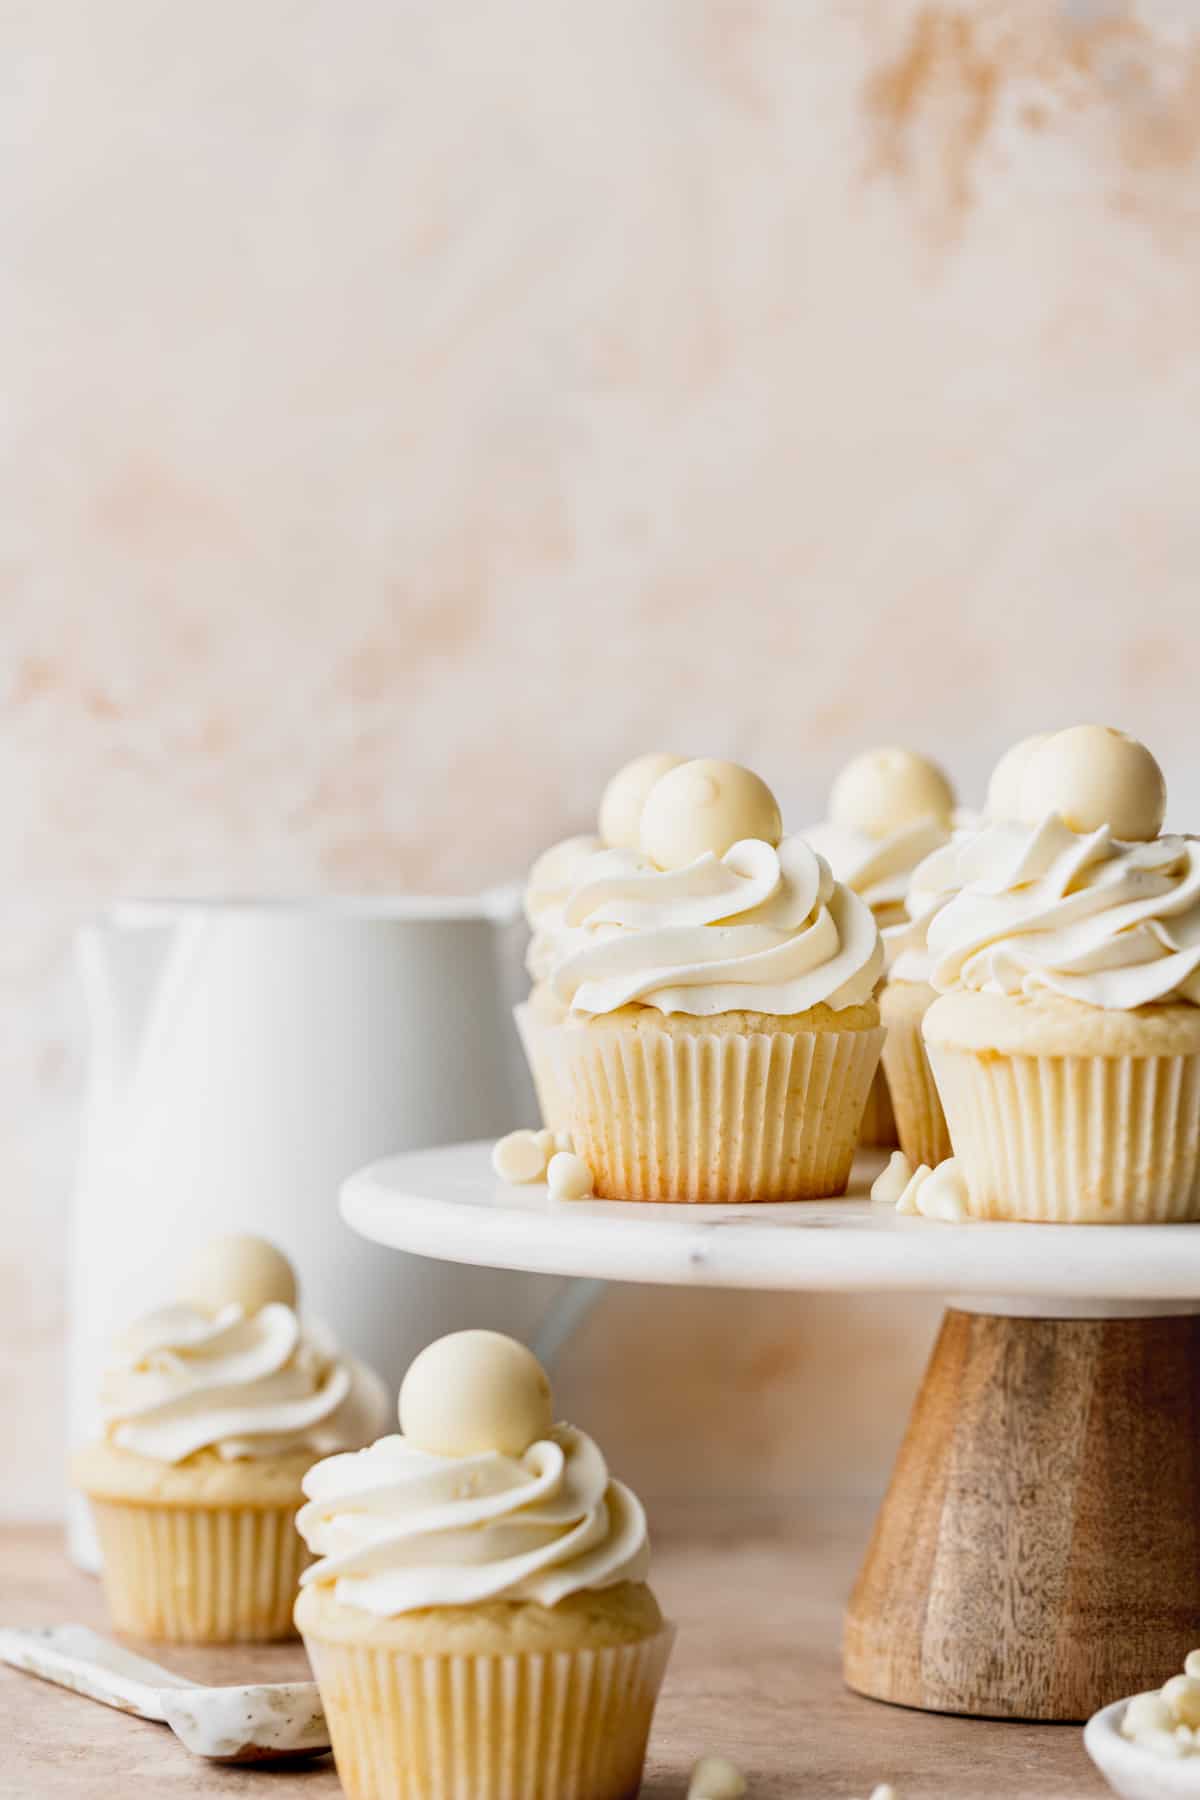 White chocolate truffle cupcakes on a cake stand.